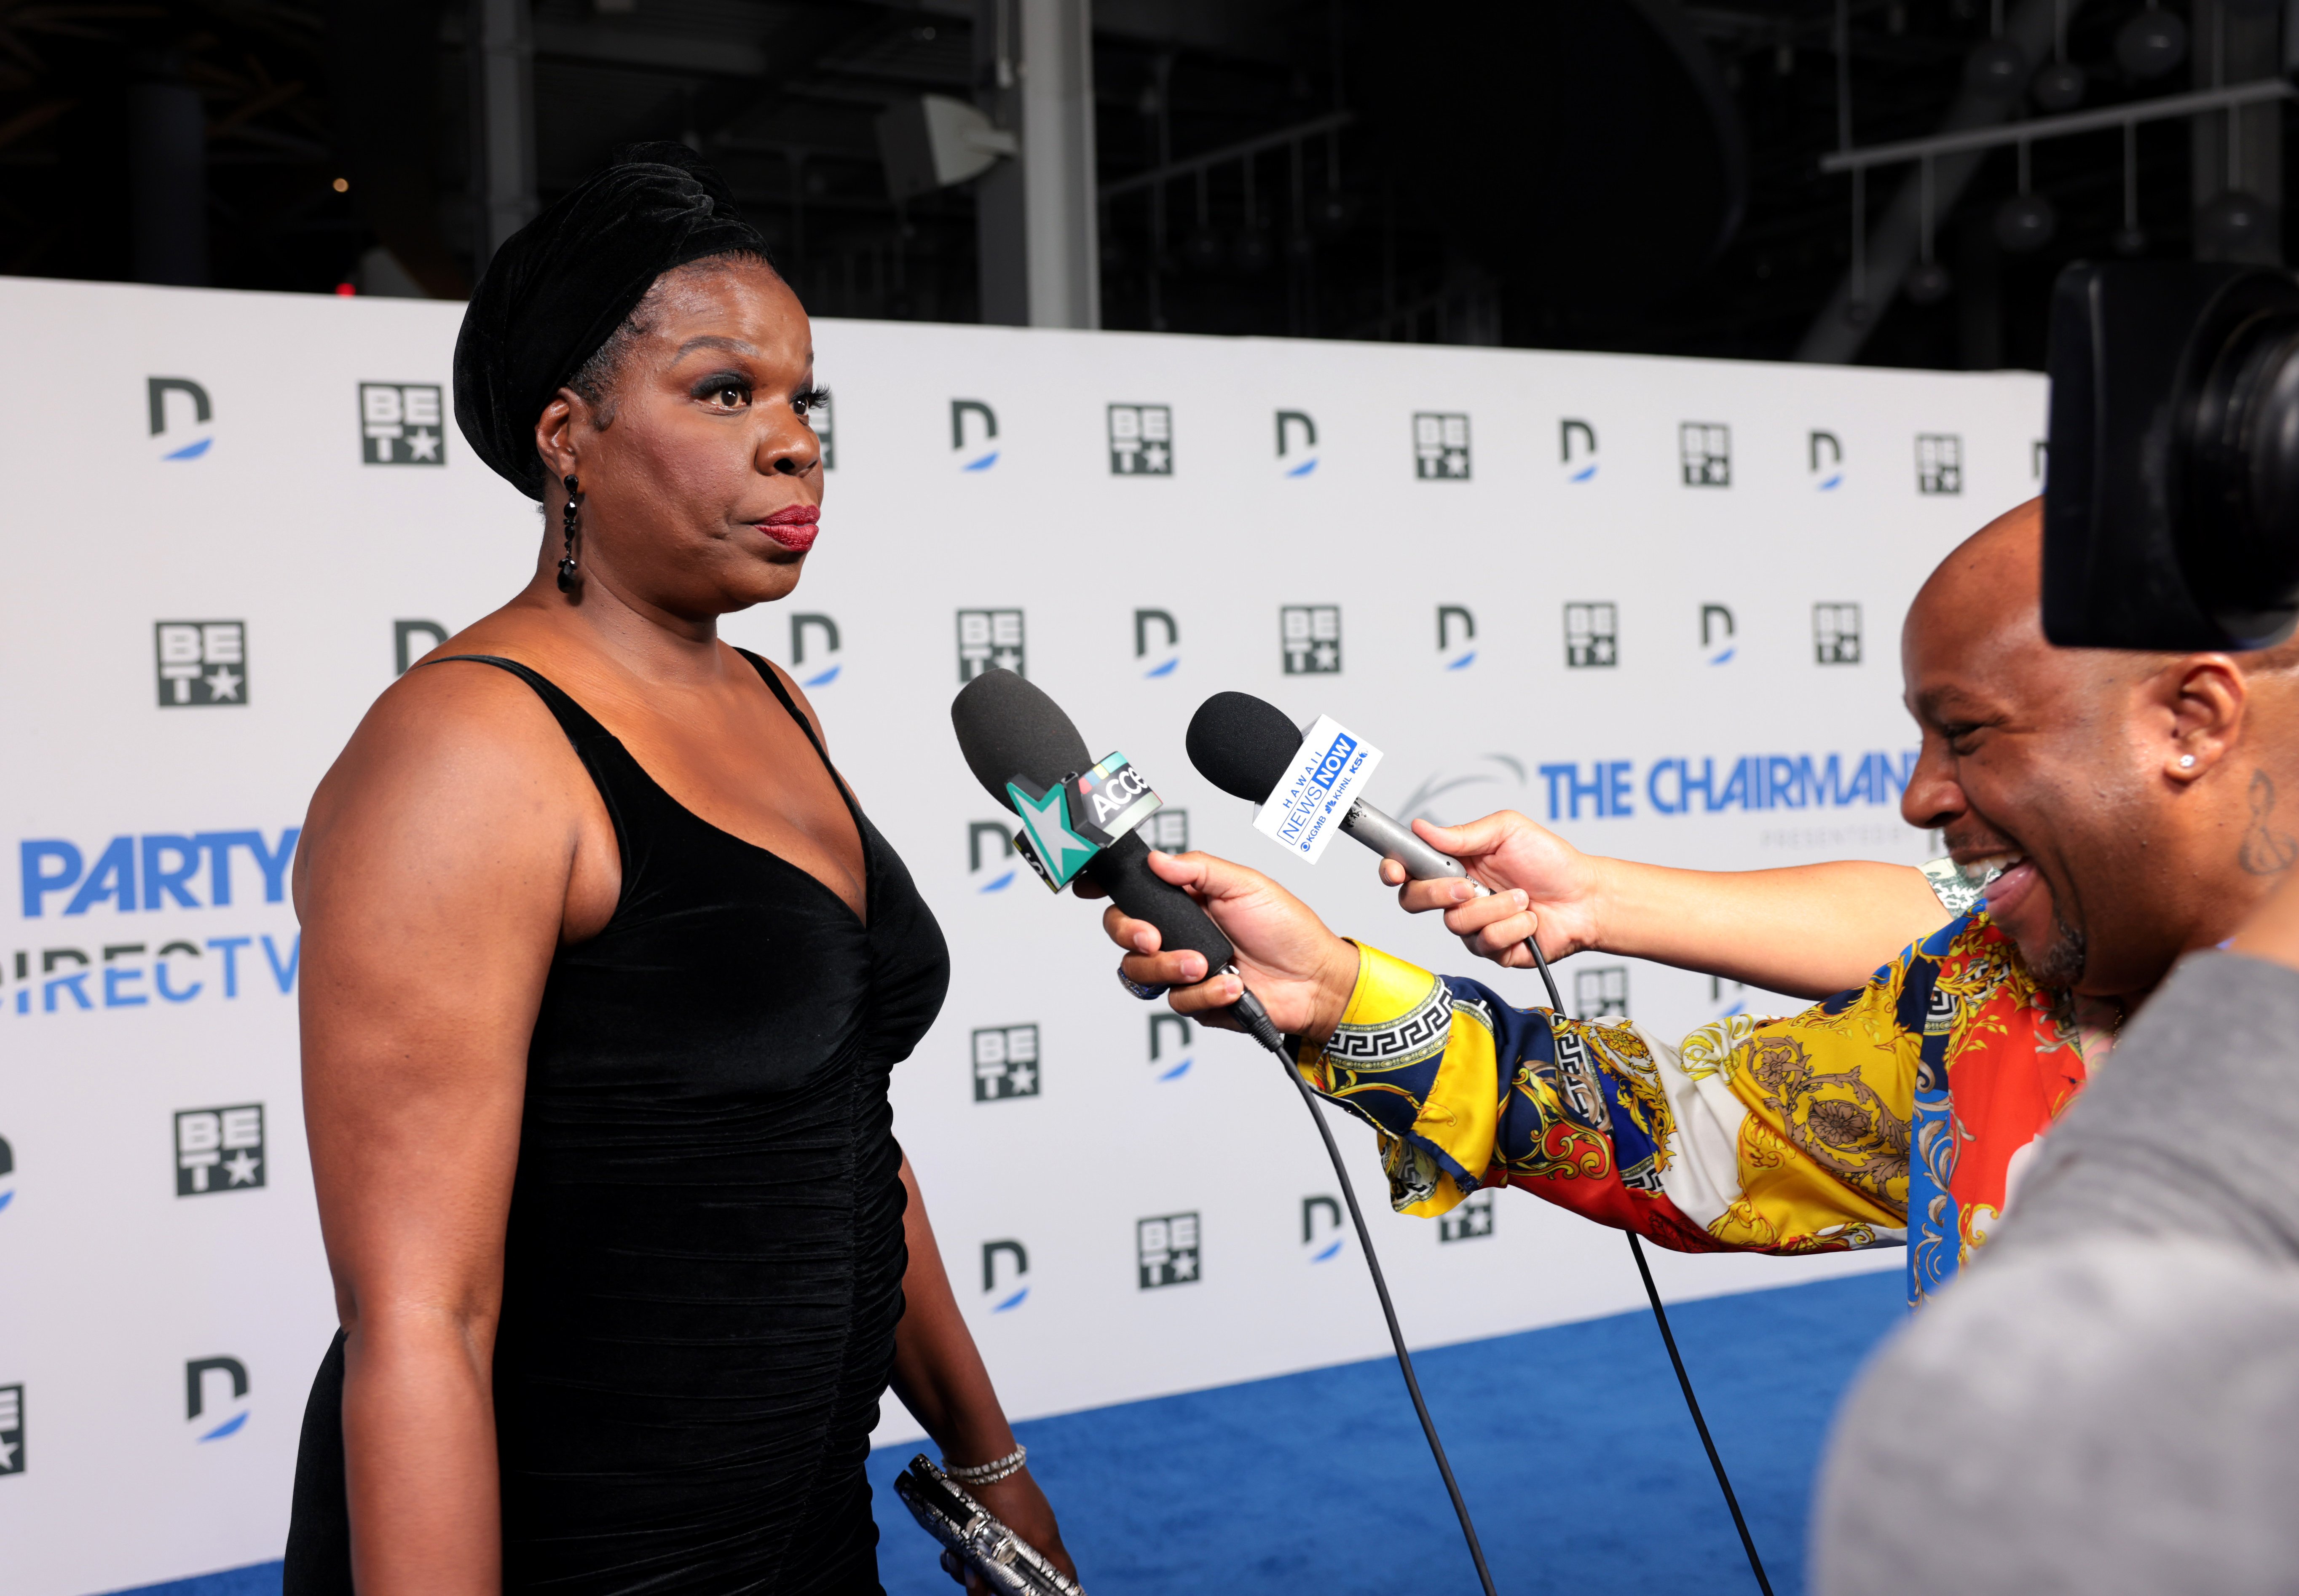  Leslie Jones at "The Chairman's Party" hosted at SoFi Stadium, Inglewood, California, on February 10, 2022. | Source: Getty Images